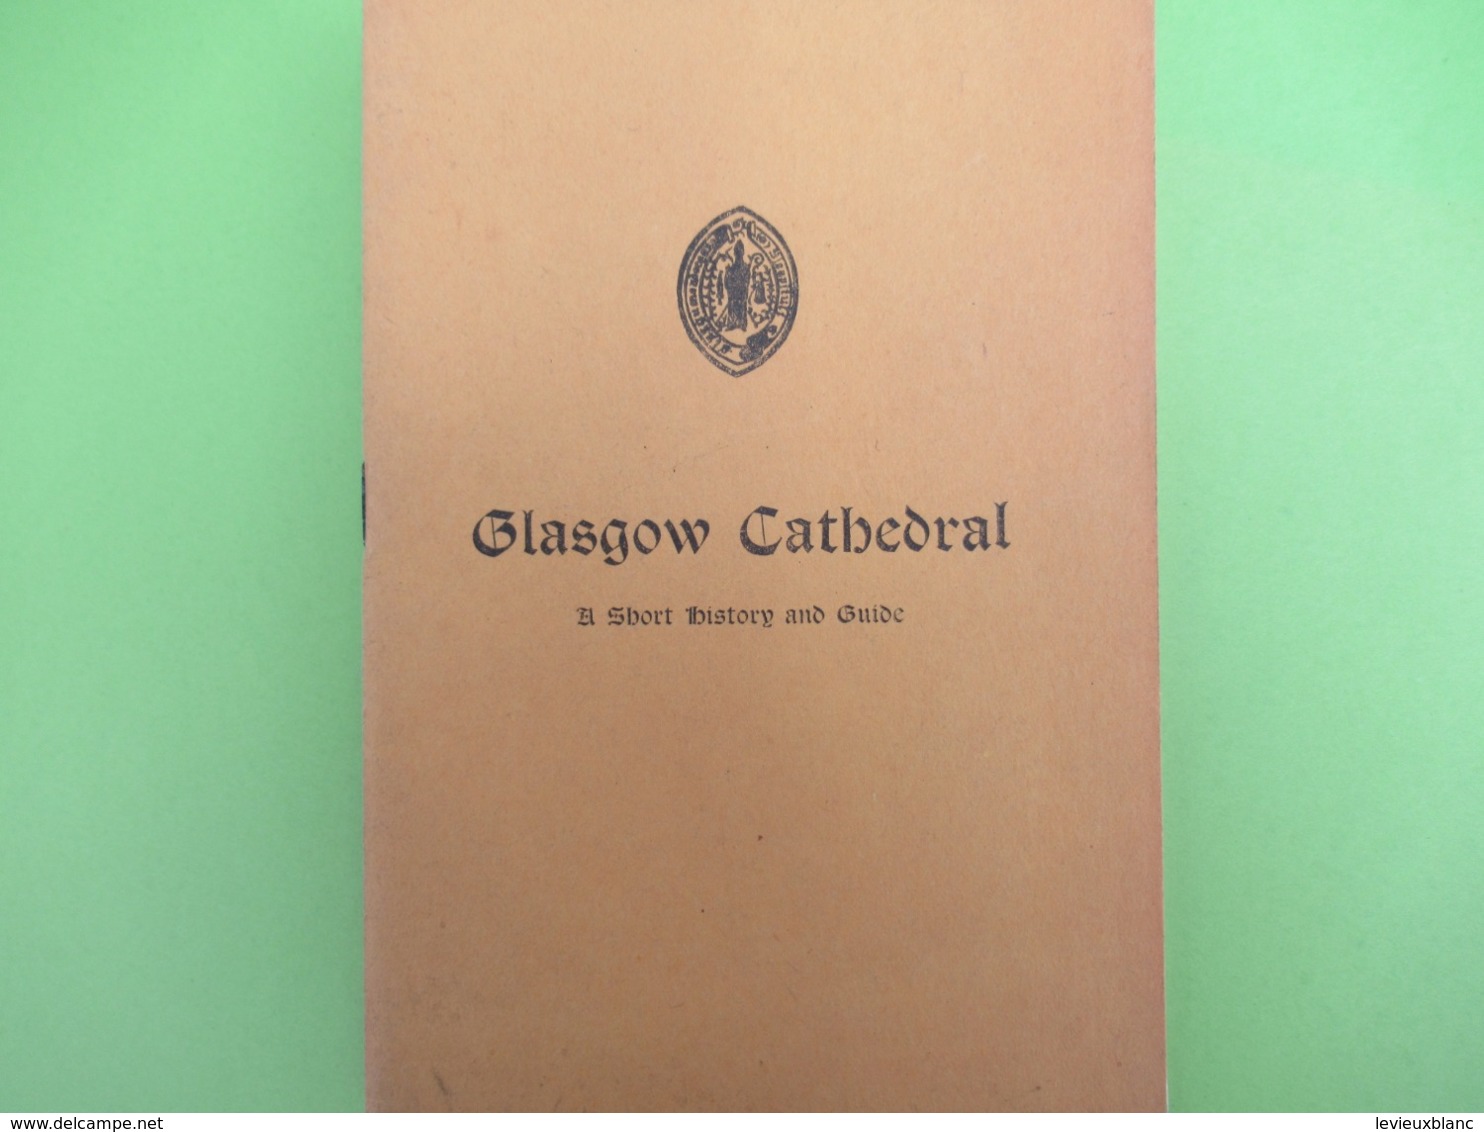 Guide Historique/A Short History And Guide/GLASGOW CATHEDRAL/A Nevile Davidson/Minister Of Glasgow/1938          PGC383 - Architectuur